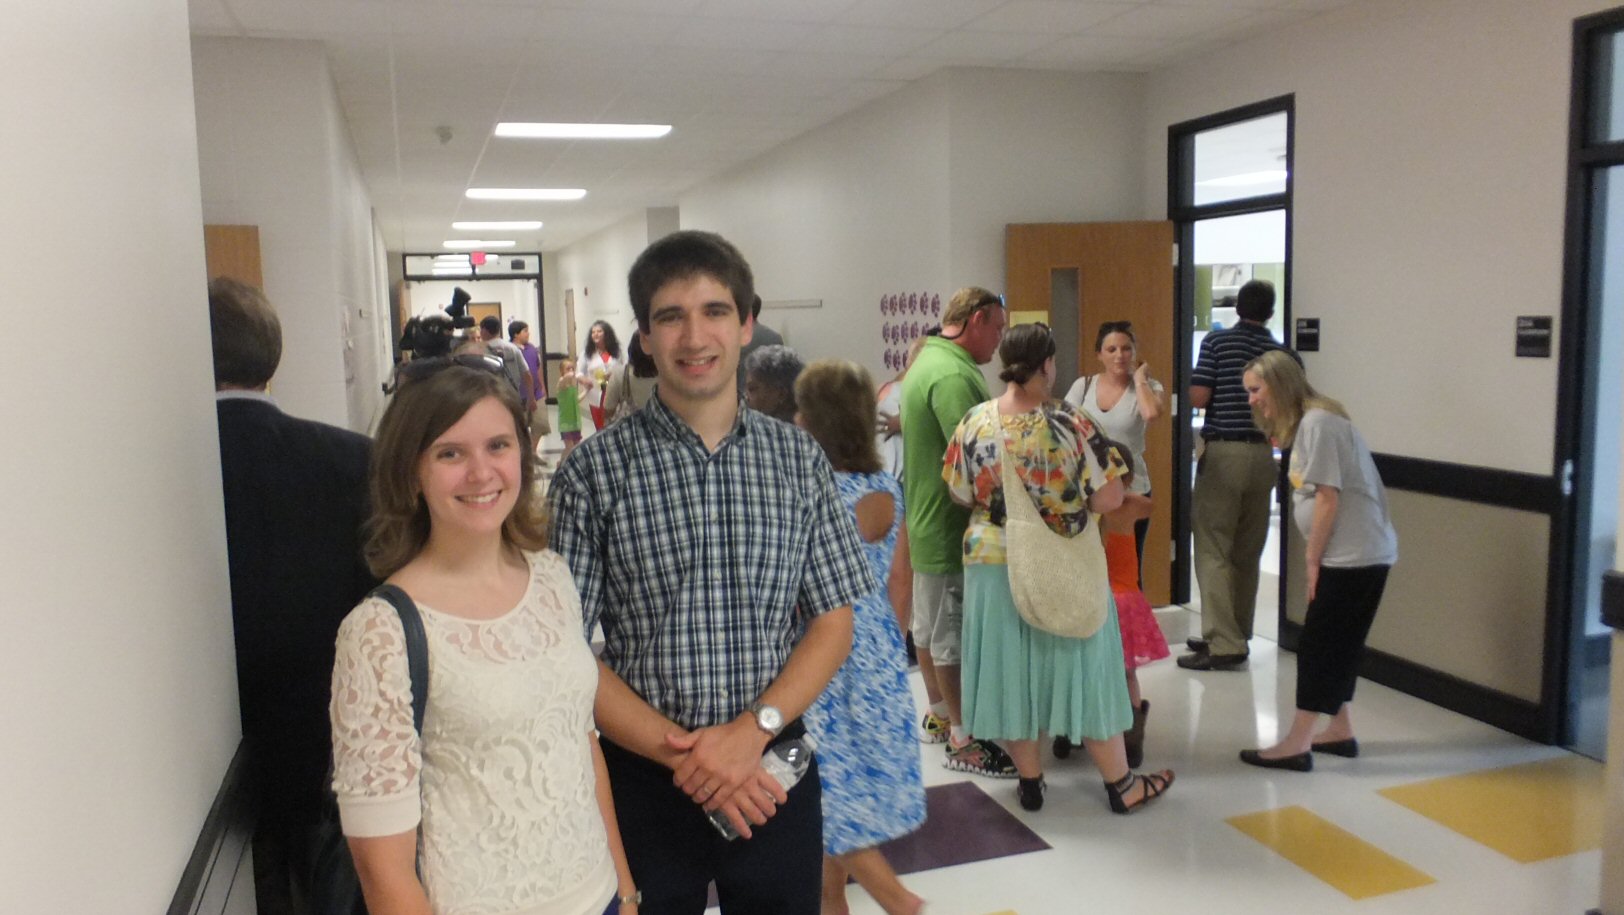 Inauguration of the new Madison County Middle School August 03 2014 with Lindsey Schneider teacher at Lincoln Academy and Vinvent Shneider MBA Graduate of Montevallo University and Gurley Lions Club Member